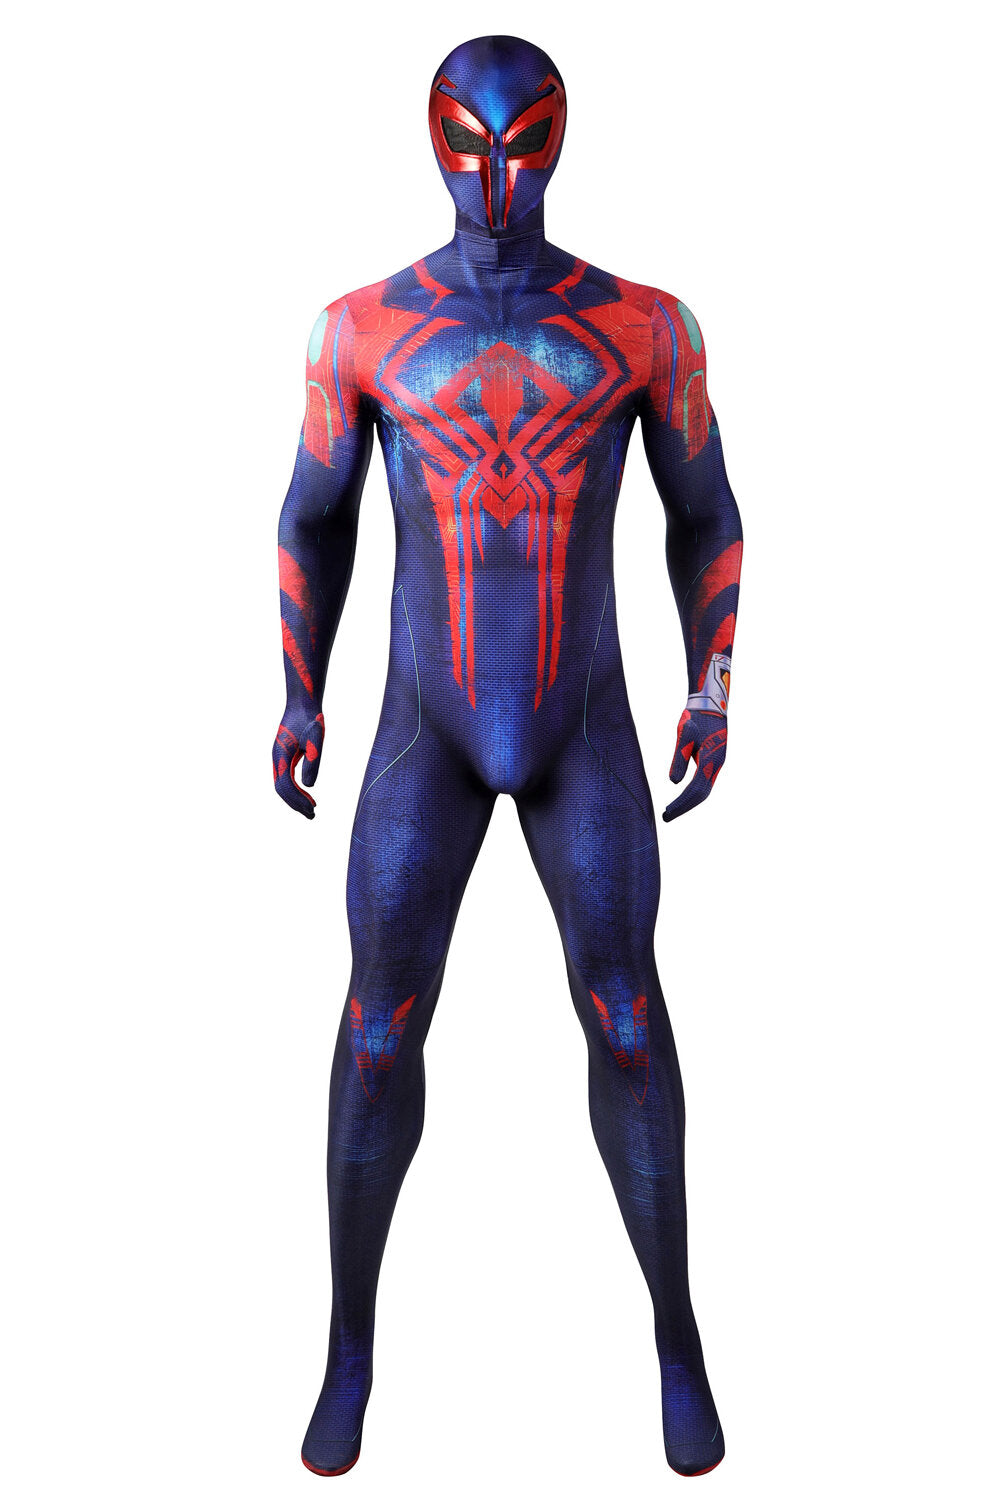 Miguel O'Hara Spider-Man 2099 Costume for Kids and Adults. Premium Qua ...